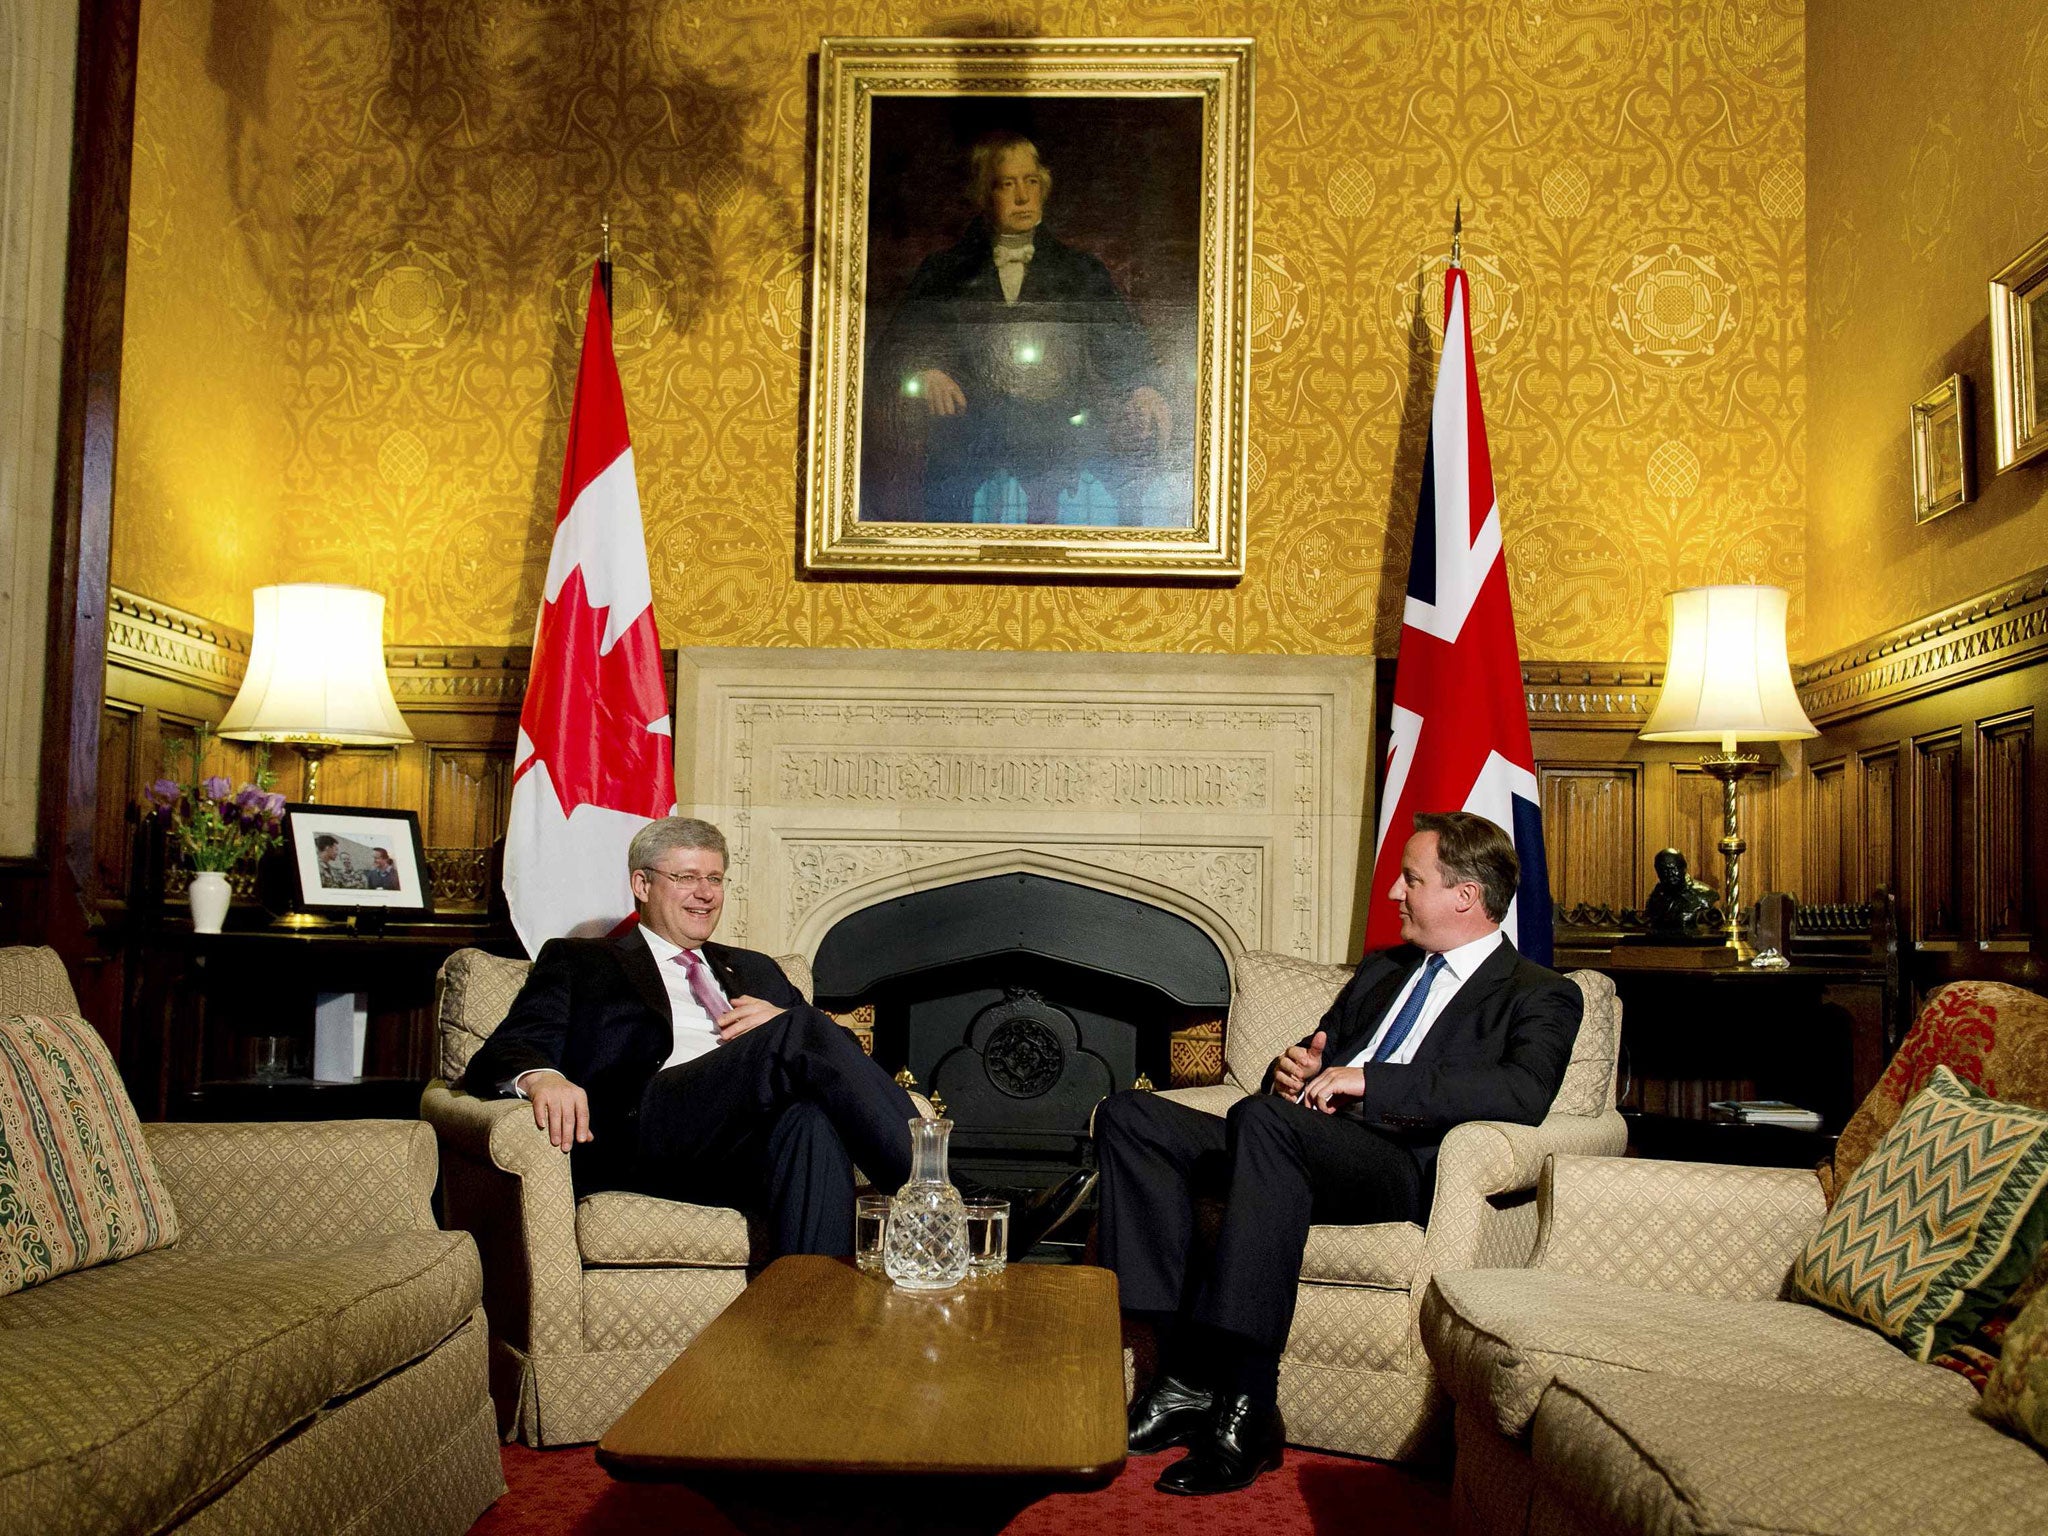 David Cameron with Stephen Harper following his address to both House of Parliament